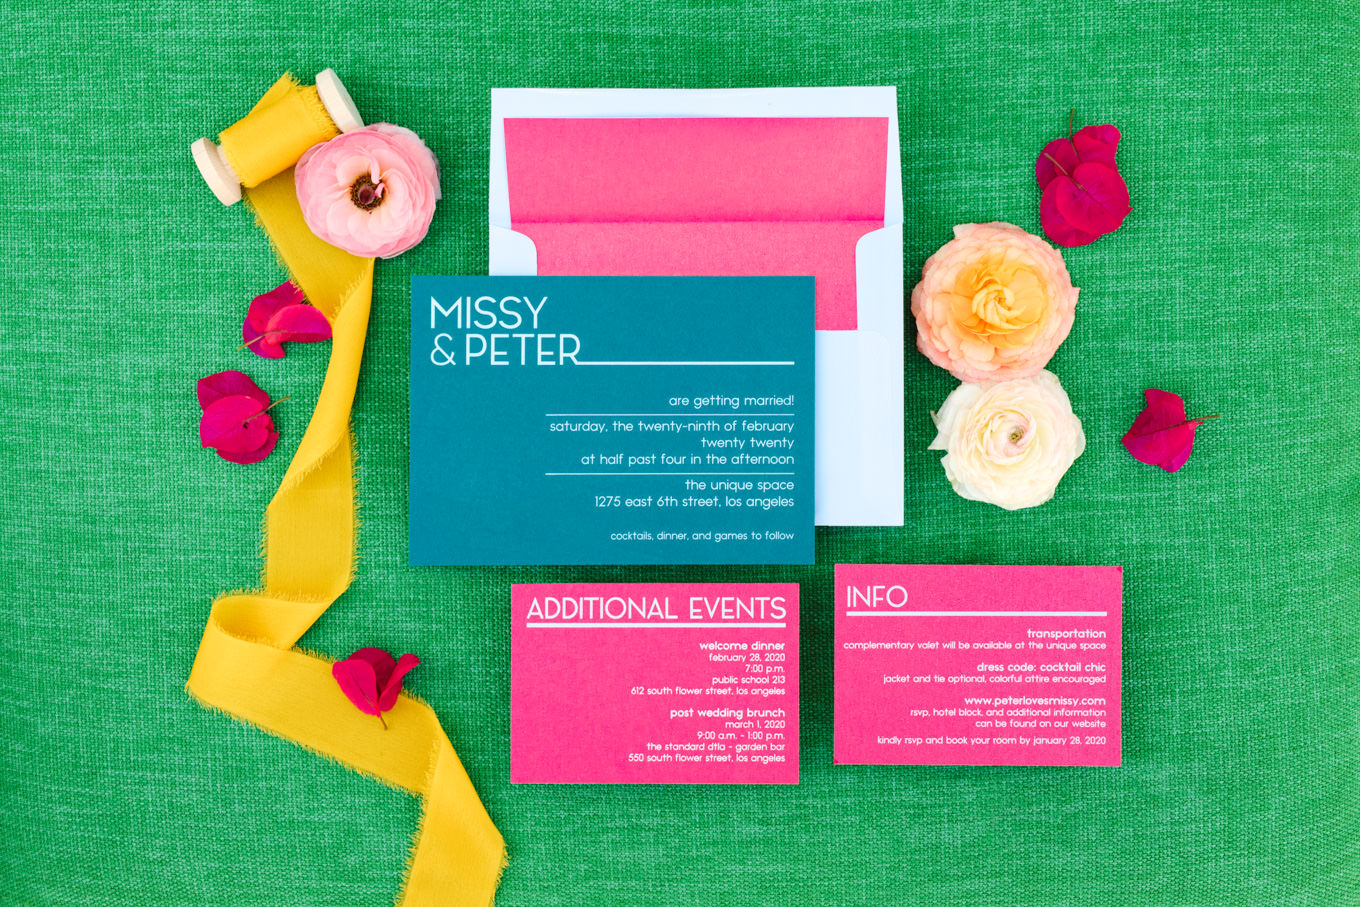 Colorful invitation suite | Colorful wedding at The Unique Space Los Angeles published in The Knot Magazine | Fresh and colorful photography for fun-loving couples in Southern California | #colorfulwedding #losangeleswedding #weddingphotography #uniquespace Source: Mary Costa Photography | Los Angeles